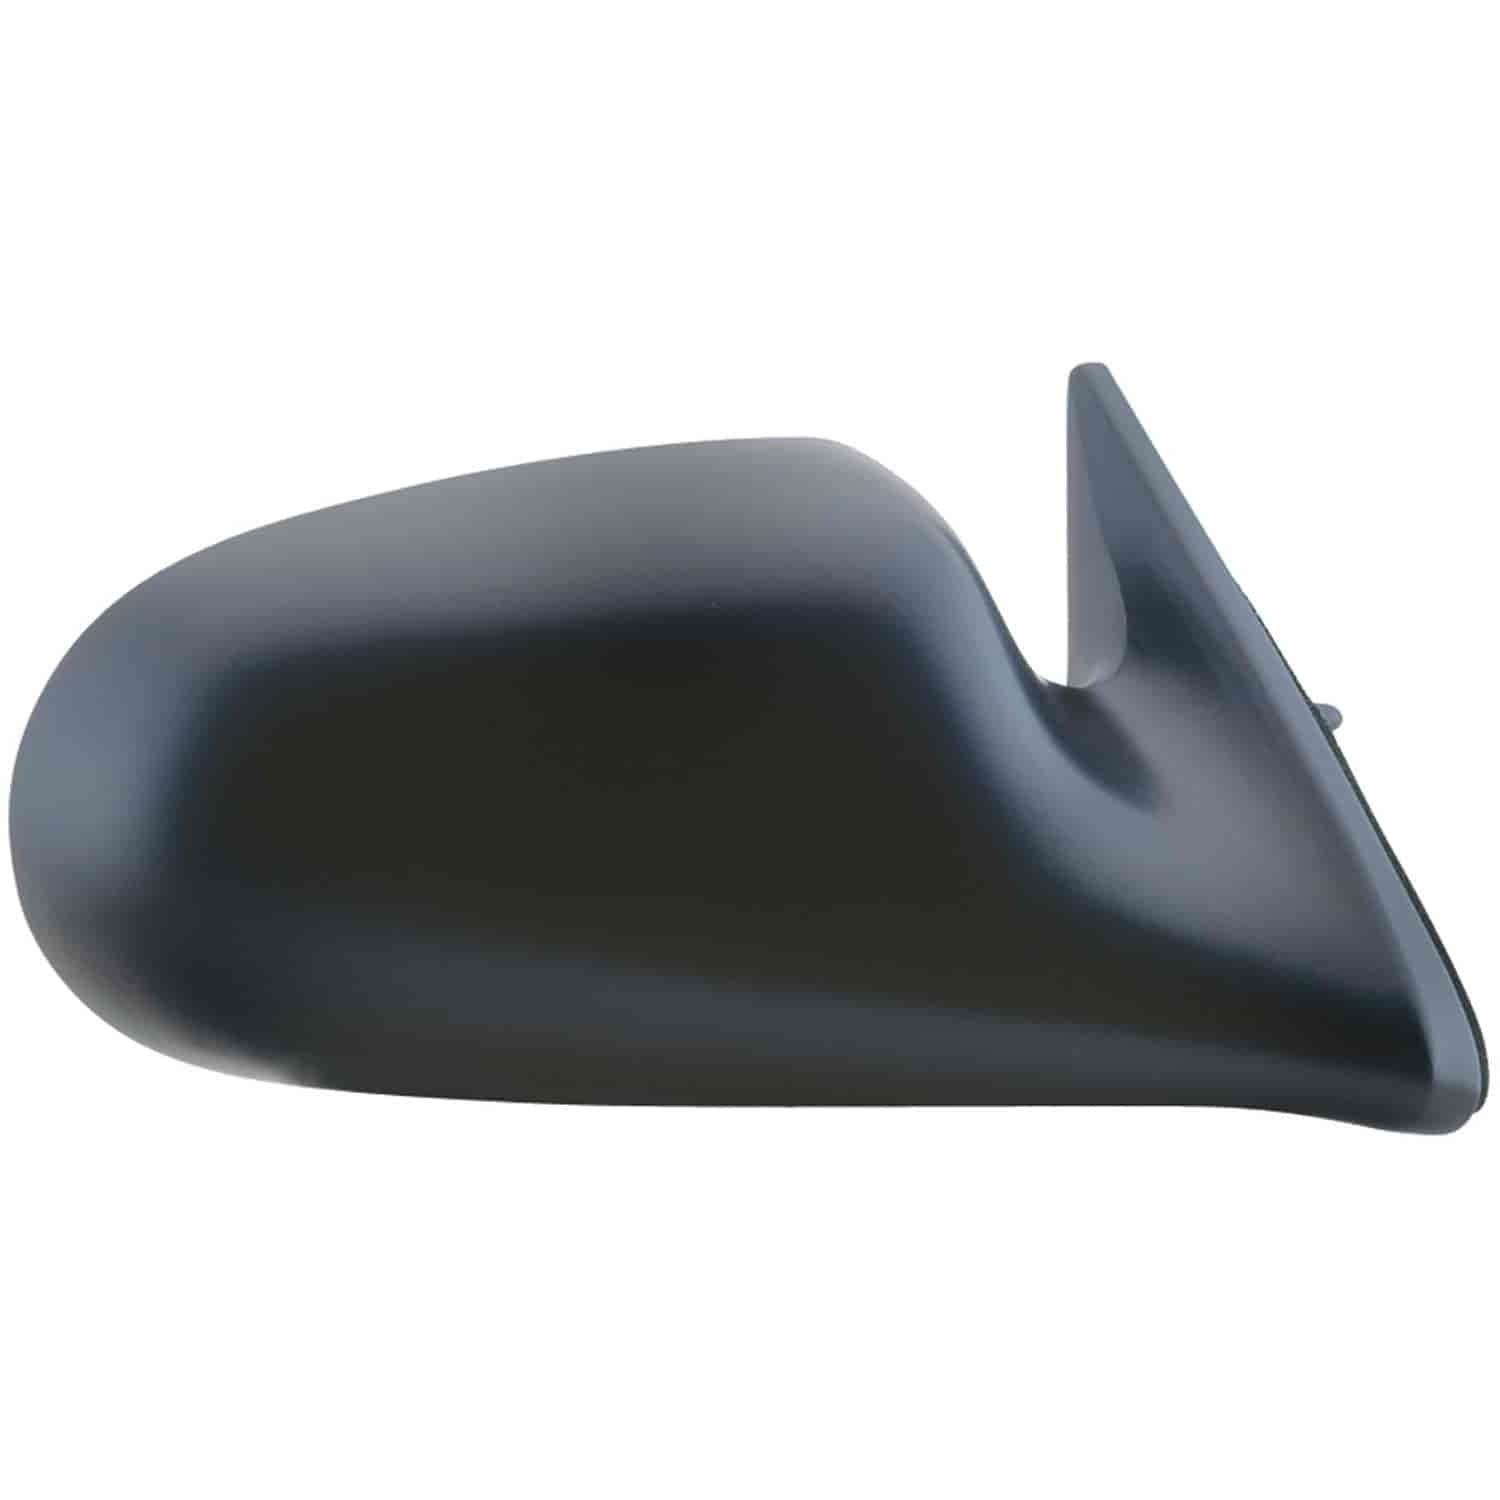 OEM Style Replacement mirror for 95-99 Nissan Sentra 200SX passenger side mirror tested to fit and f